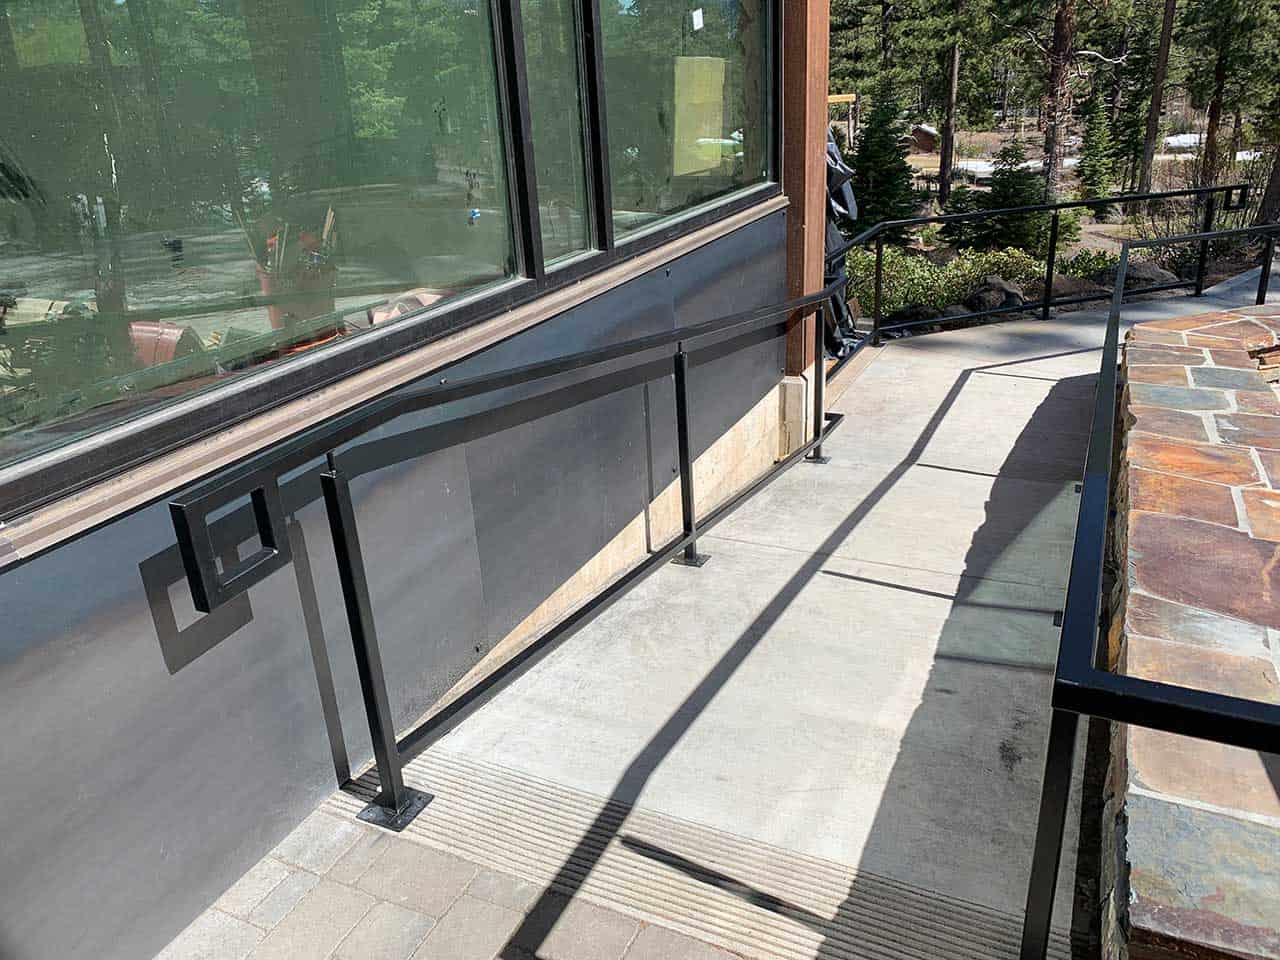 A concrete wheelchair ramp with a black handrail runs alongside a building with large windows and leads to a paved area.